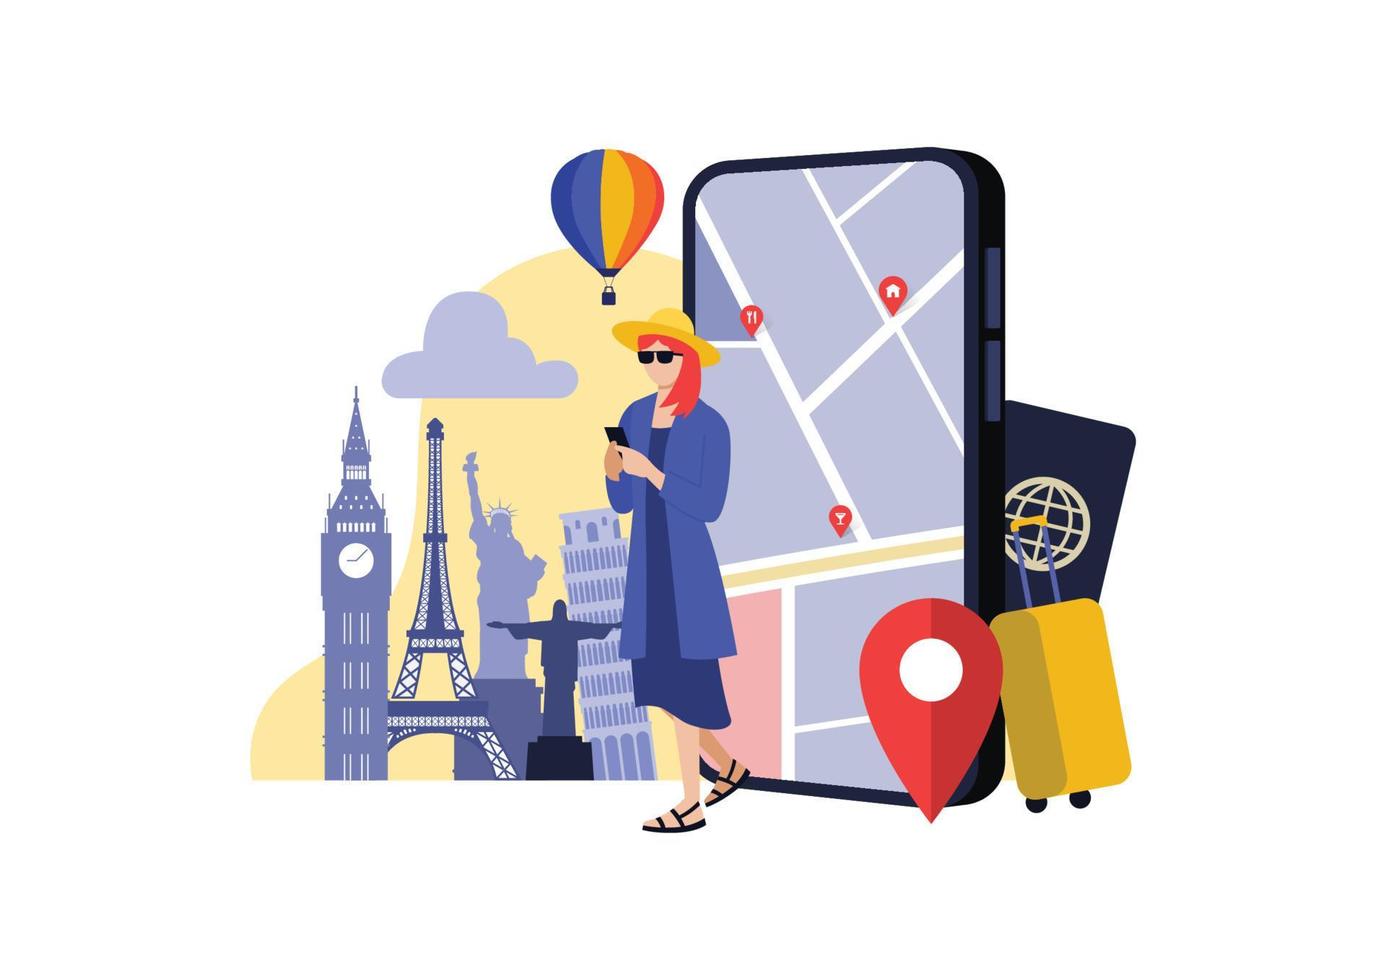 Woman using phone with phone screen and popular attractions in the background, concept image of a navigation application for travel, vector illustration